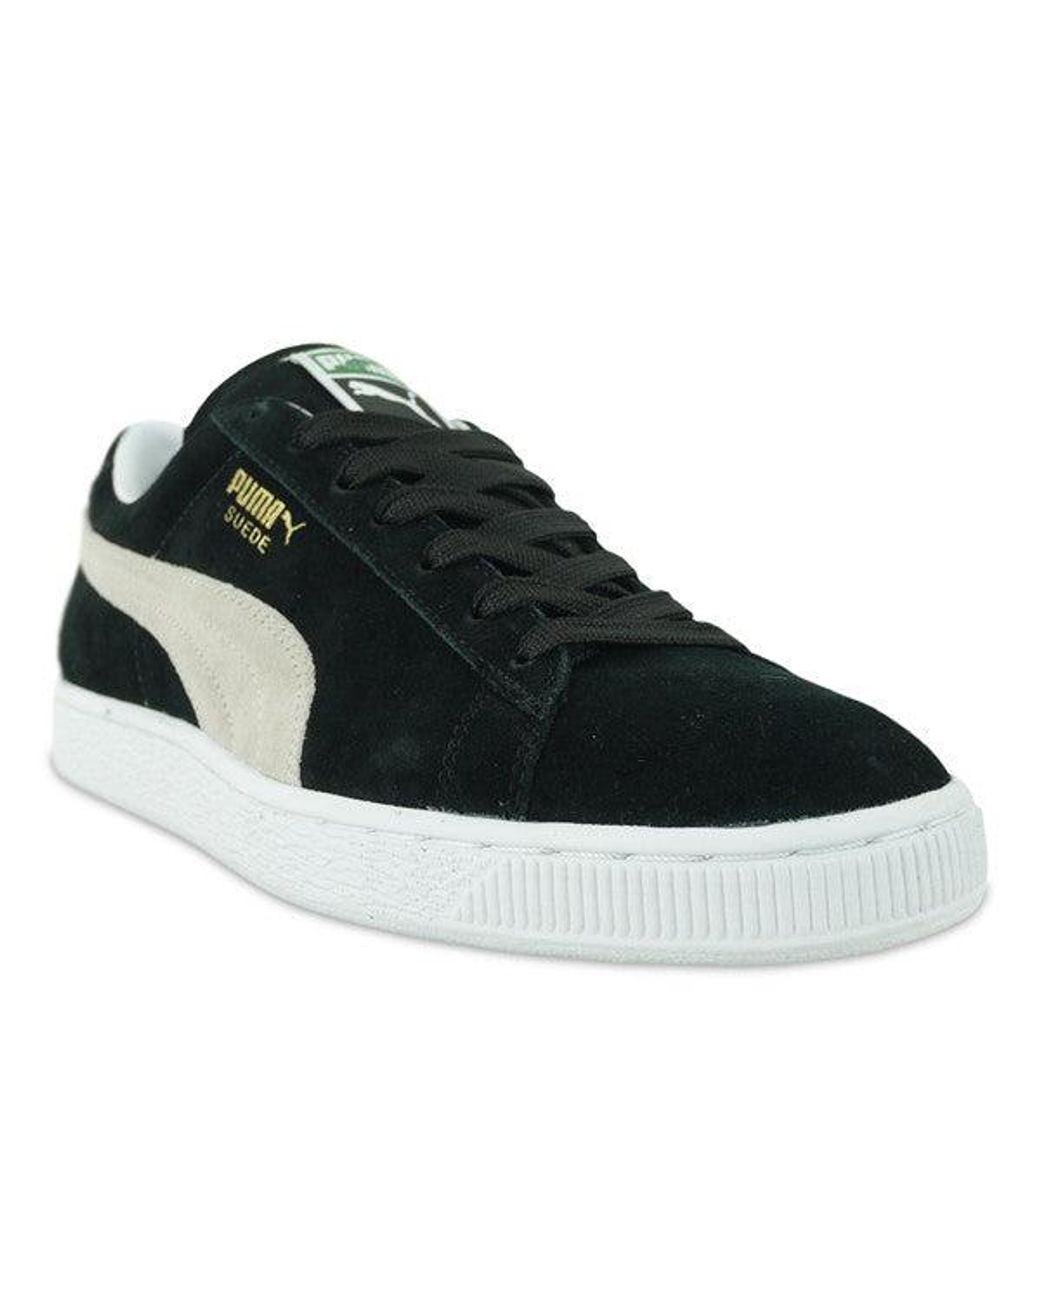 PUMA Suede Classic Trainers Black White for Men - Save 35% | Lyst